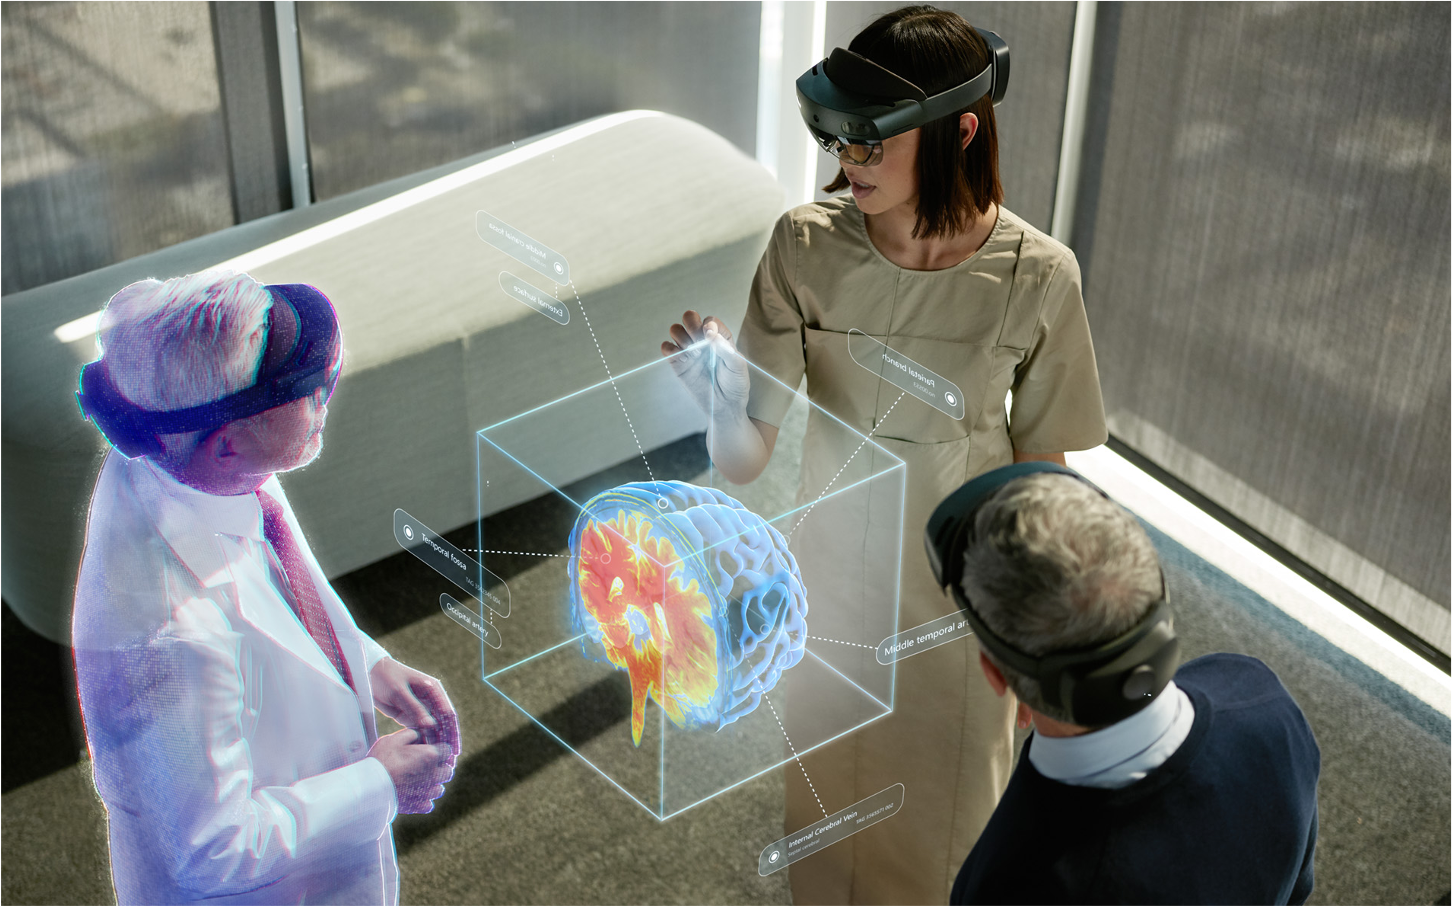 Photograph of people using HoloLens to collaborate.